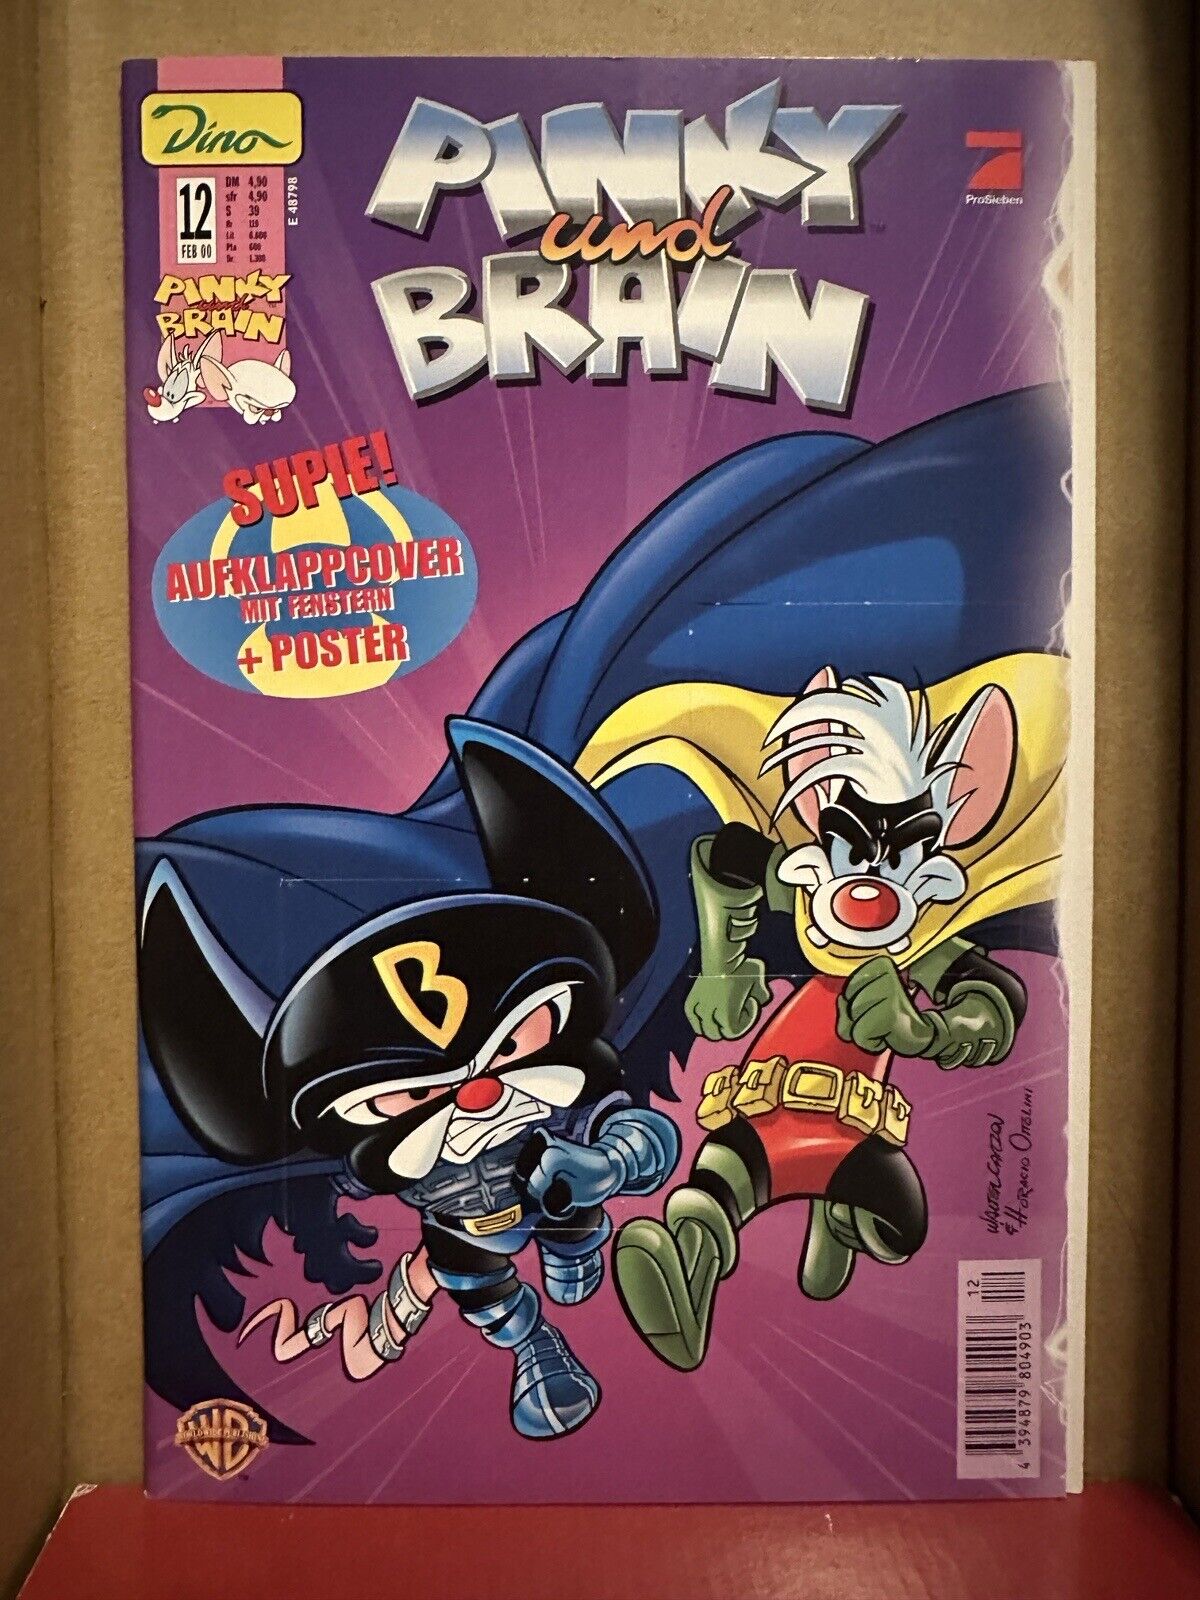 Pinky and the Brain #12 GERMAN Unique German Windowed Fold out cover VF/NM